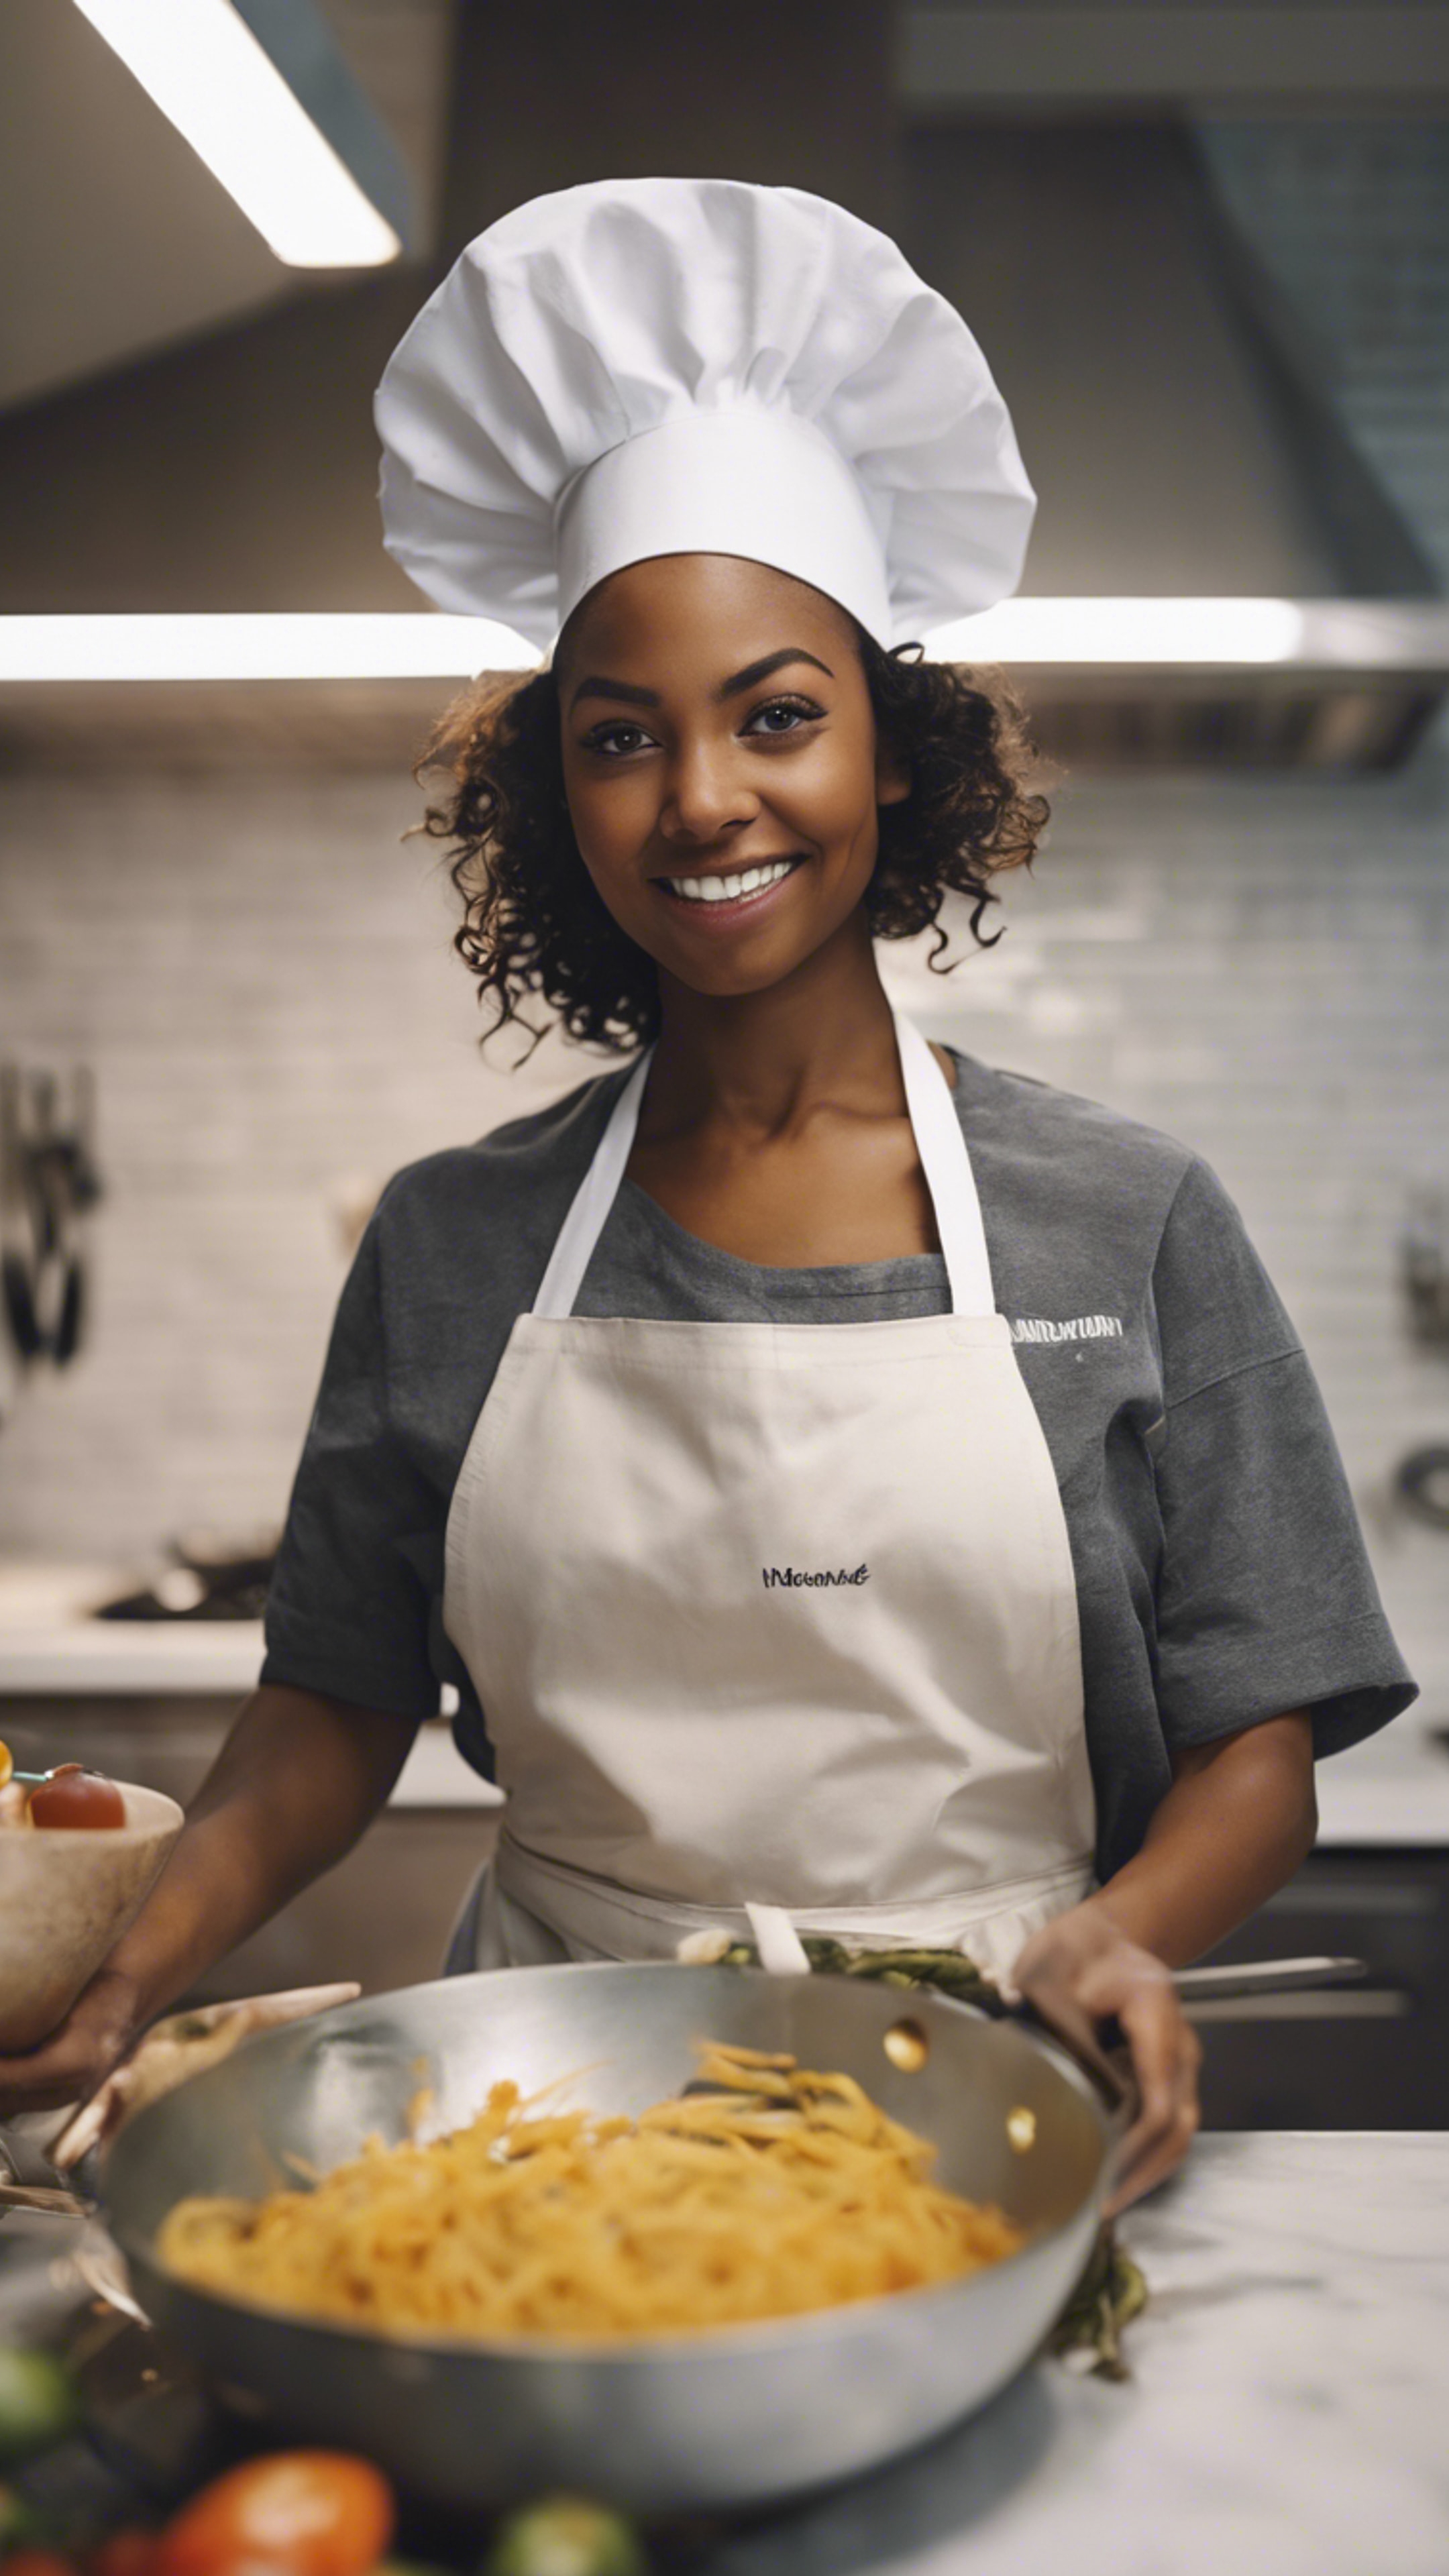 An enthusiastic black girl wearing chef’s hat and apron cooking in a modern kitchen. ورق الجدران[28127f79c89b4e3a826e]